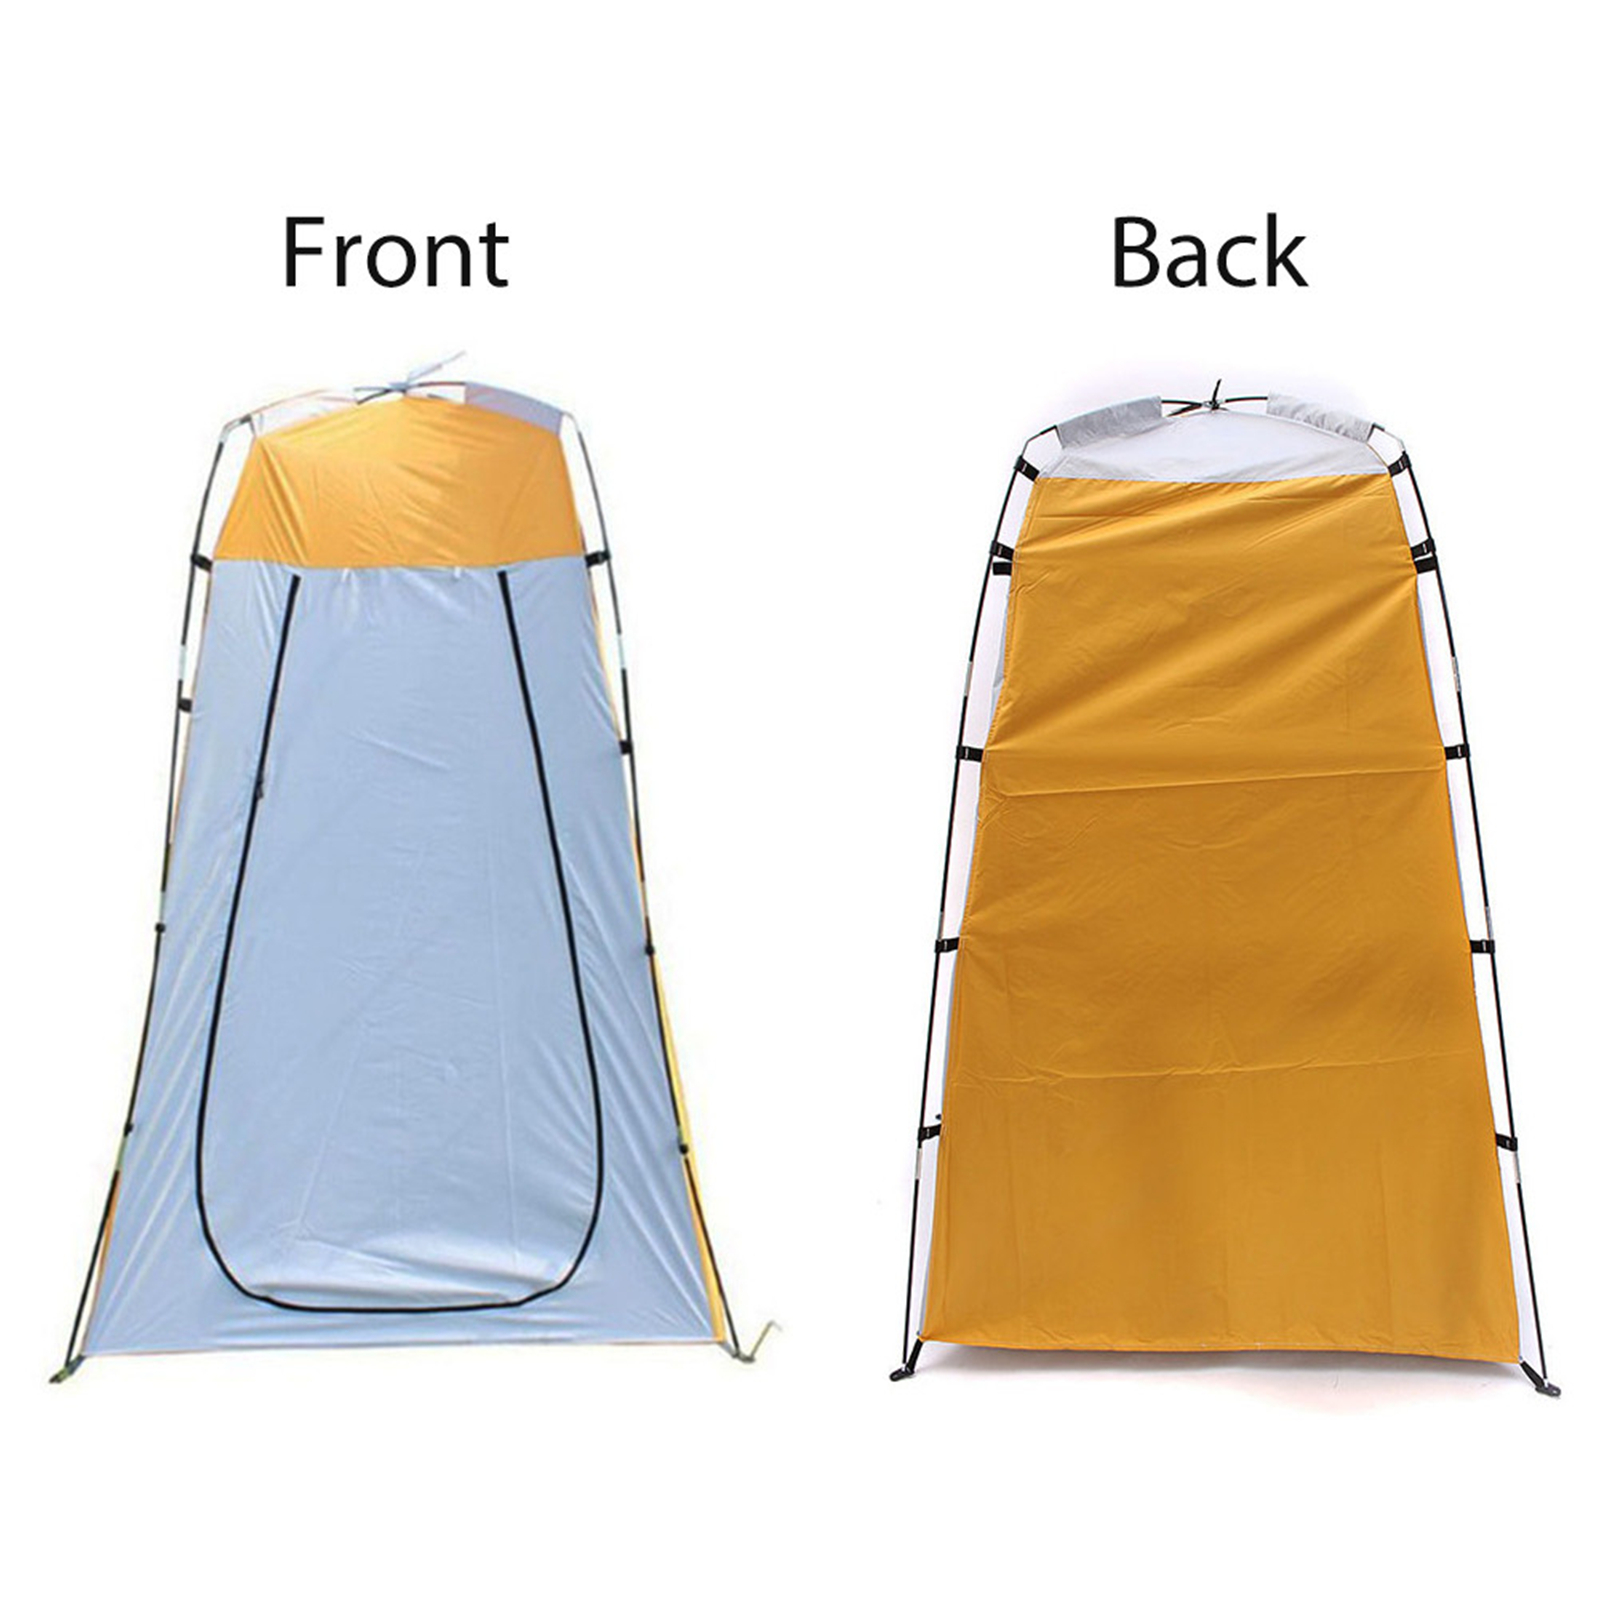 Cheap Goat Tents Outdoor Shower Bath Tent Camping Privacy Toilet Tent Portable Changing Room Fits One Person Sun Protection Quickly Build   